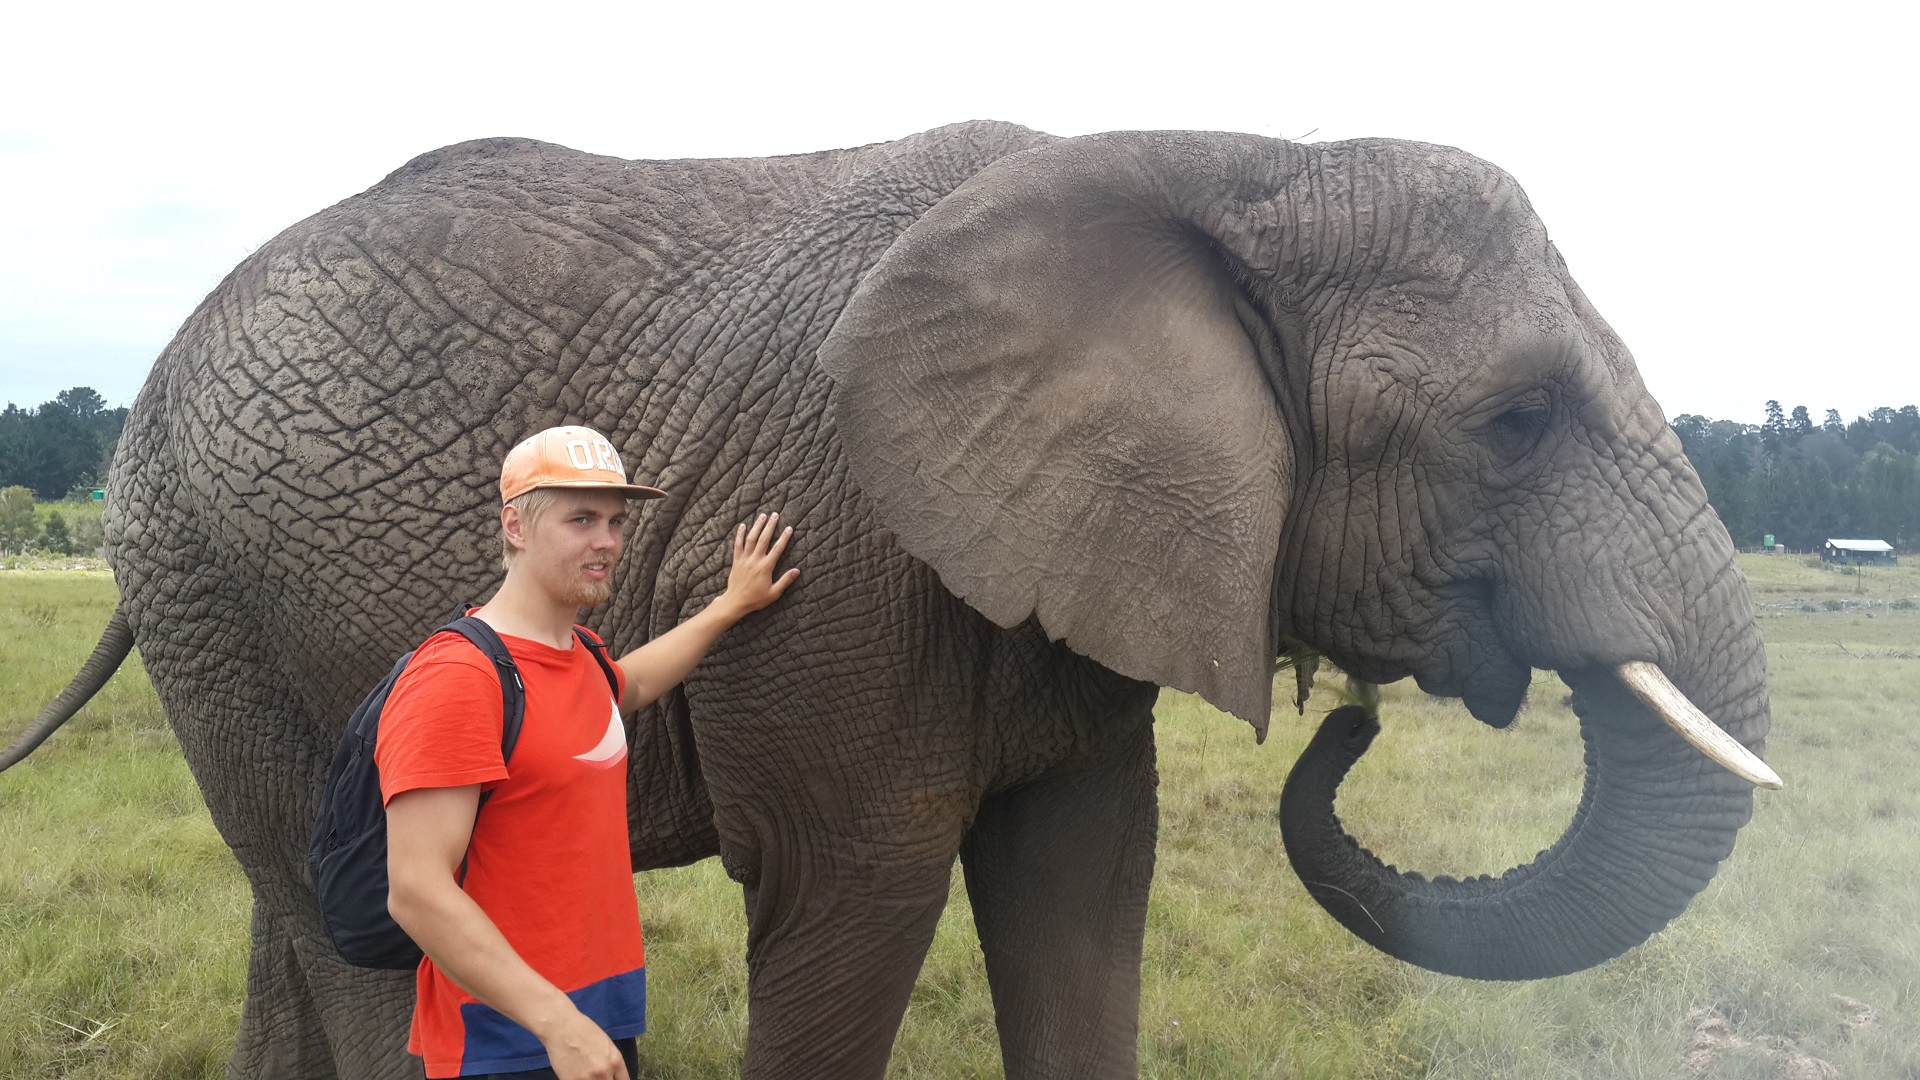 Knysna Elephan Park close to Plettenberg bay. I leared that elephants can communicate by stamping ground up to 15 kilometers and they are able to prepare to their own death after their teeth are too worn for eating.